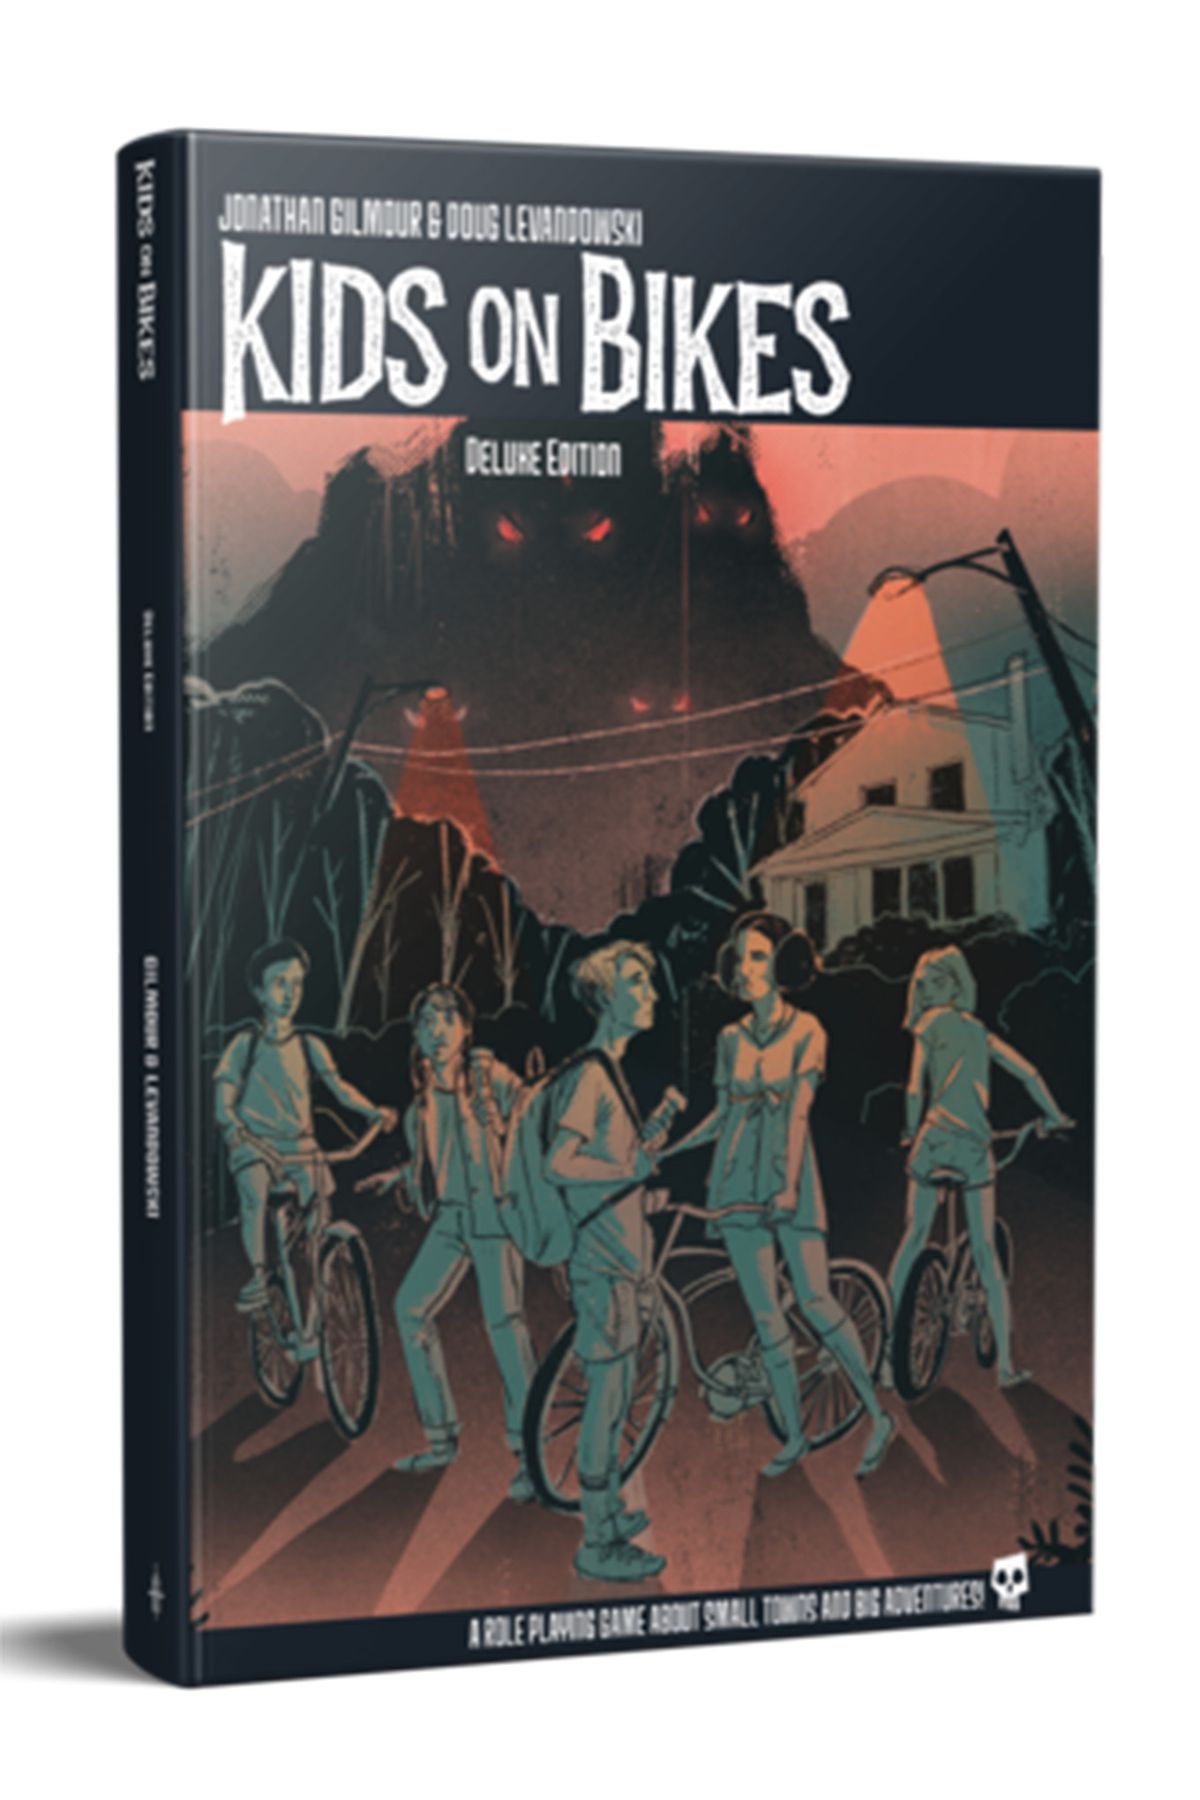 Cover art for Kids on Bikes shows some kids on their bikes in monotone with orange accents.